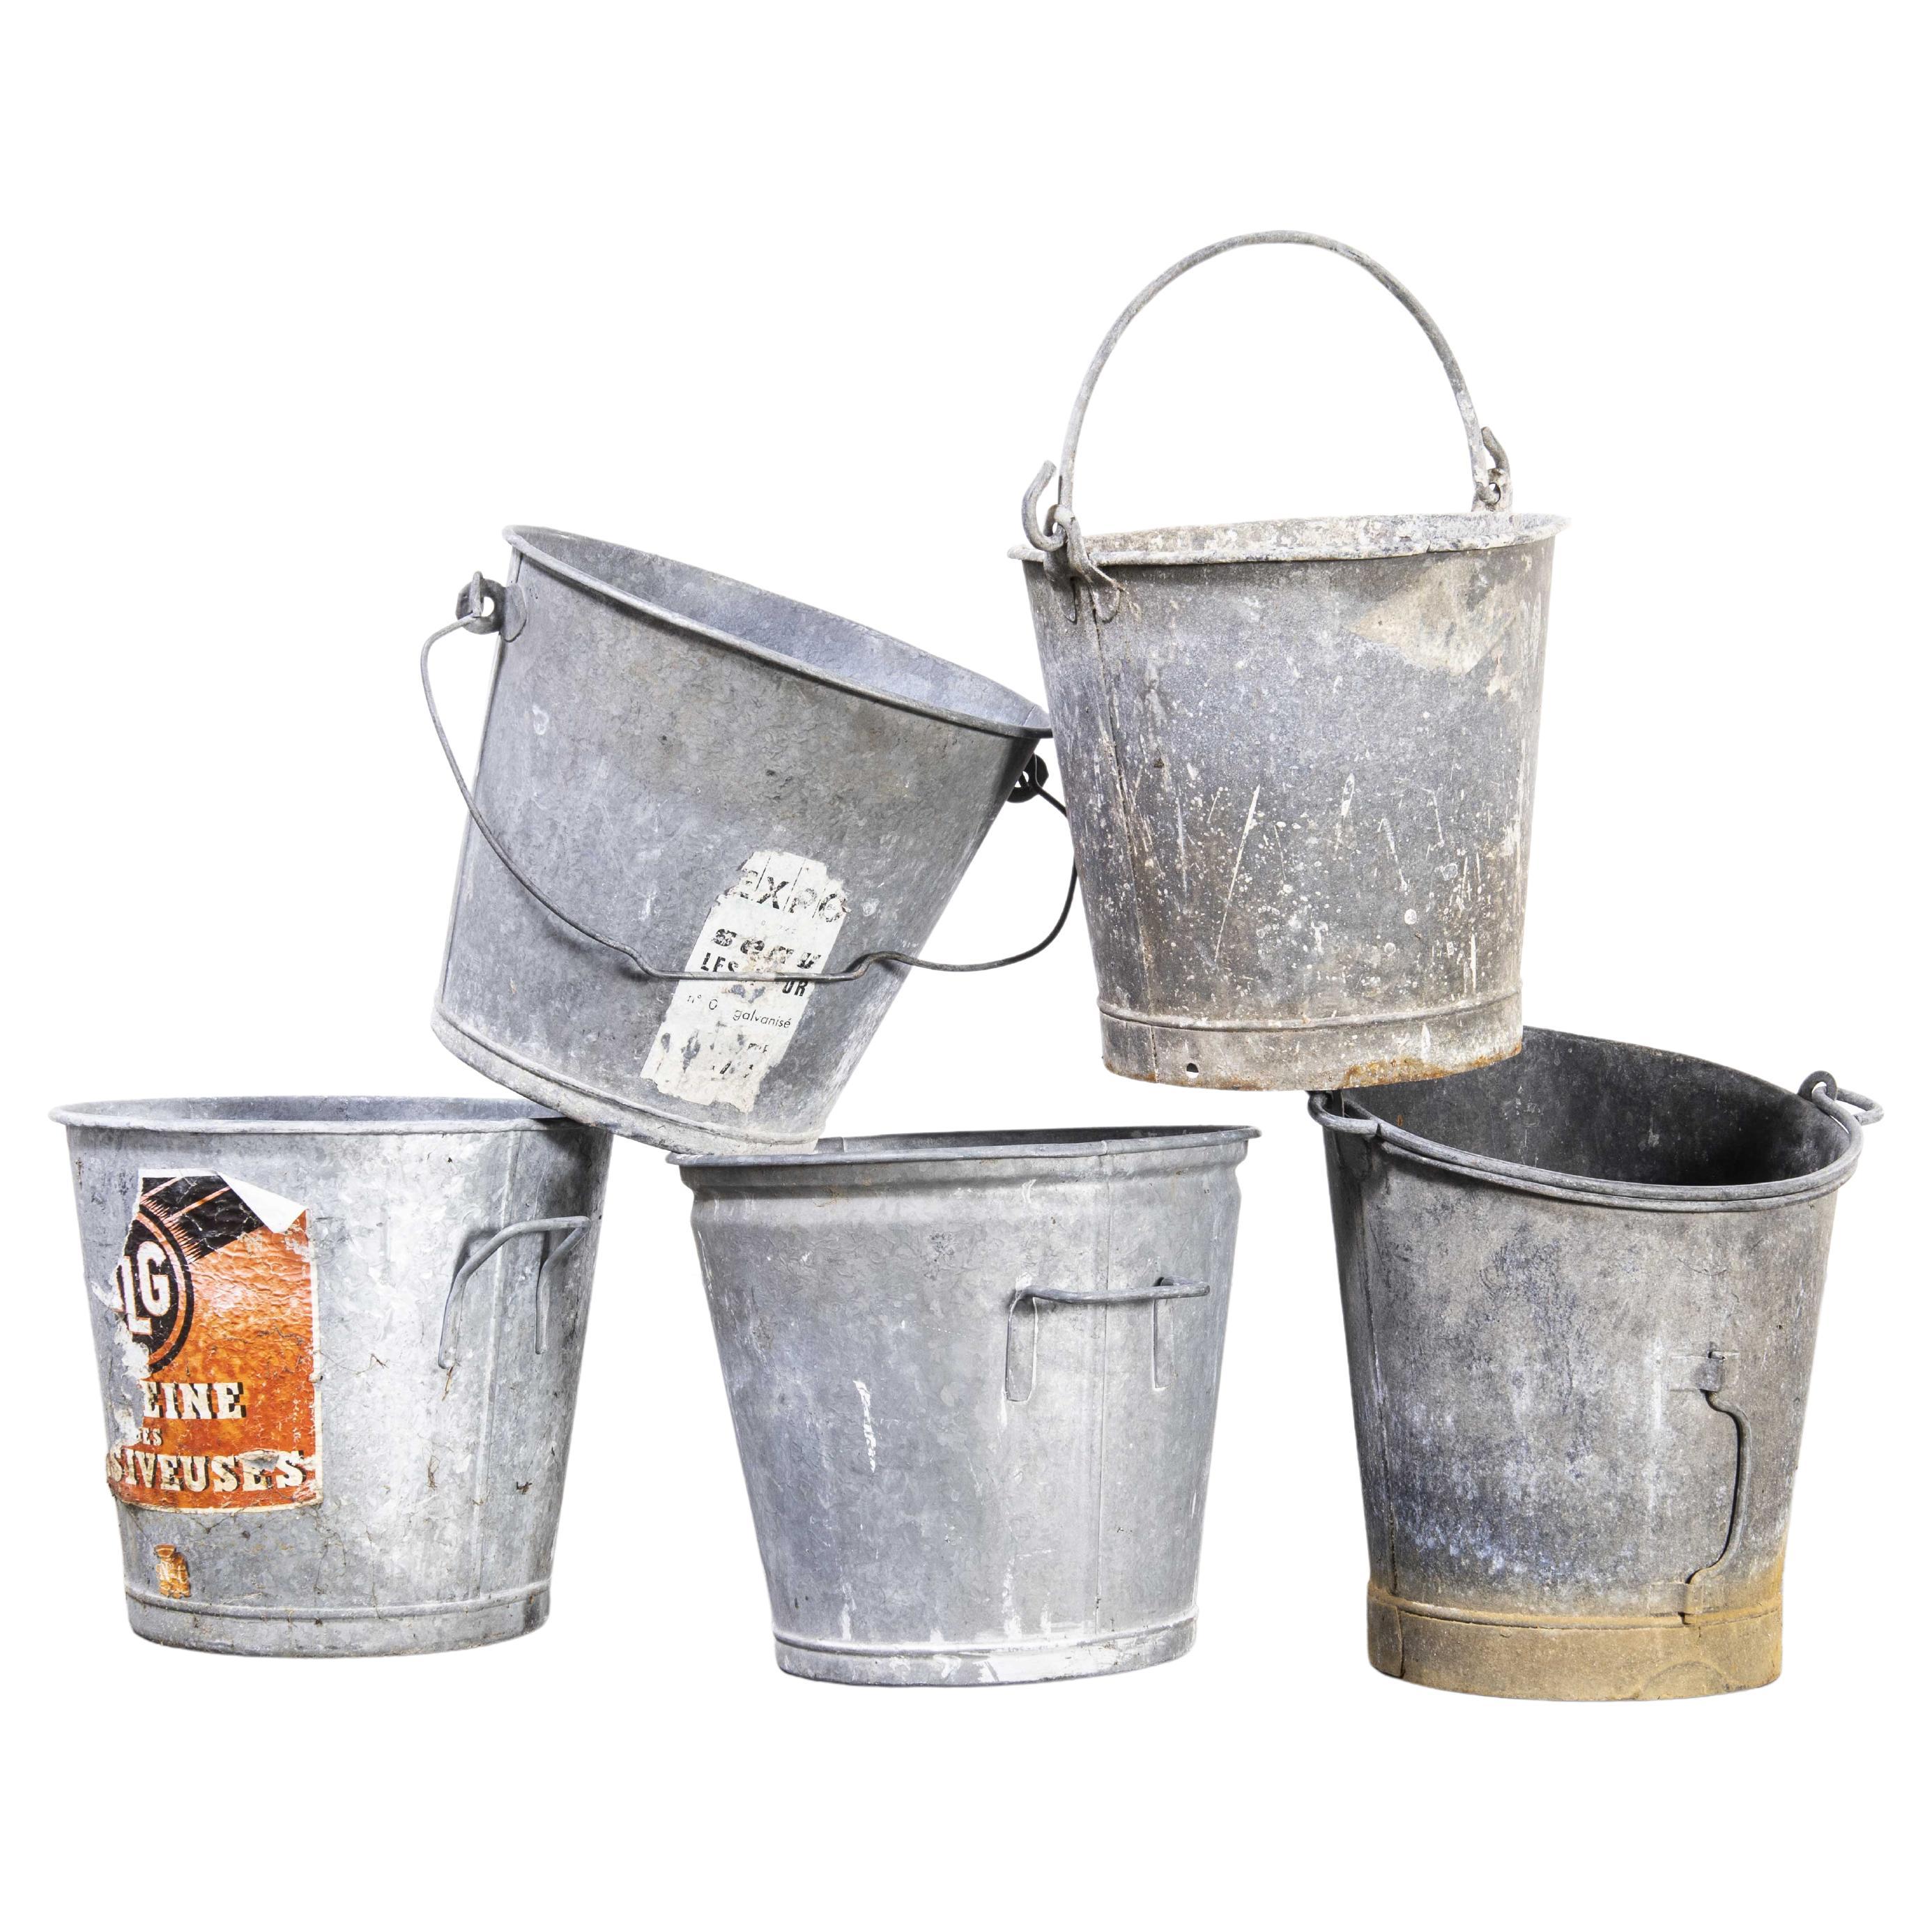 Small French Galvanised Buckets, Planters For Sale